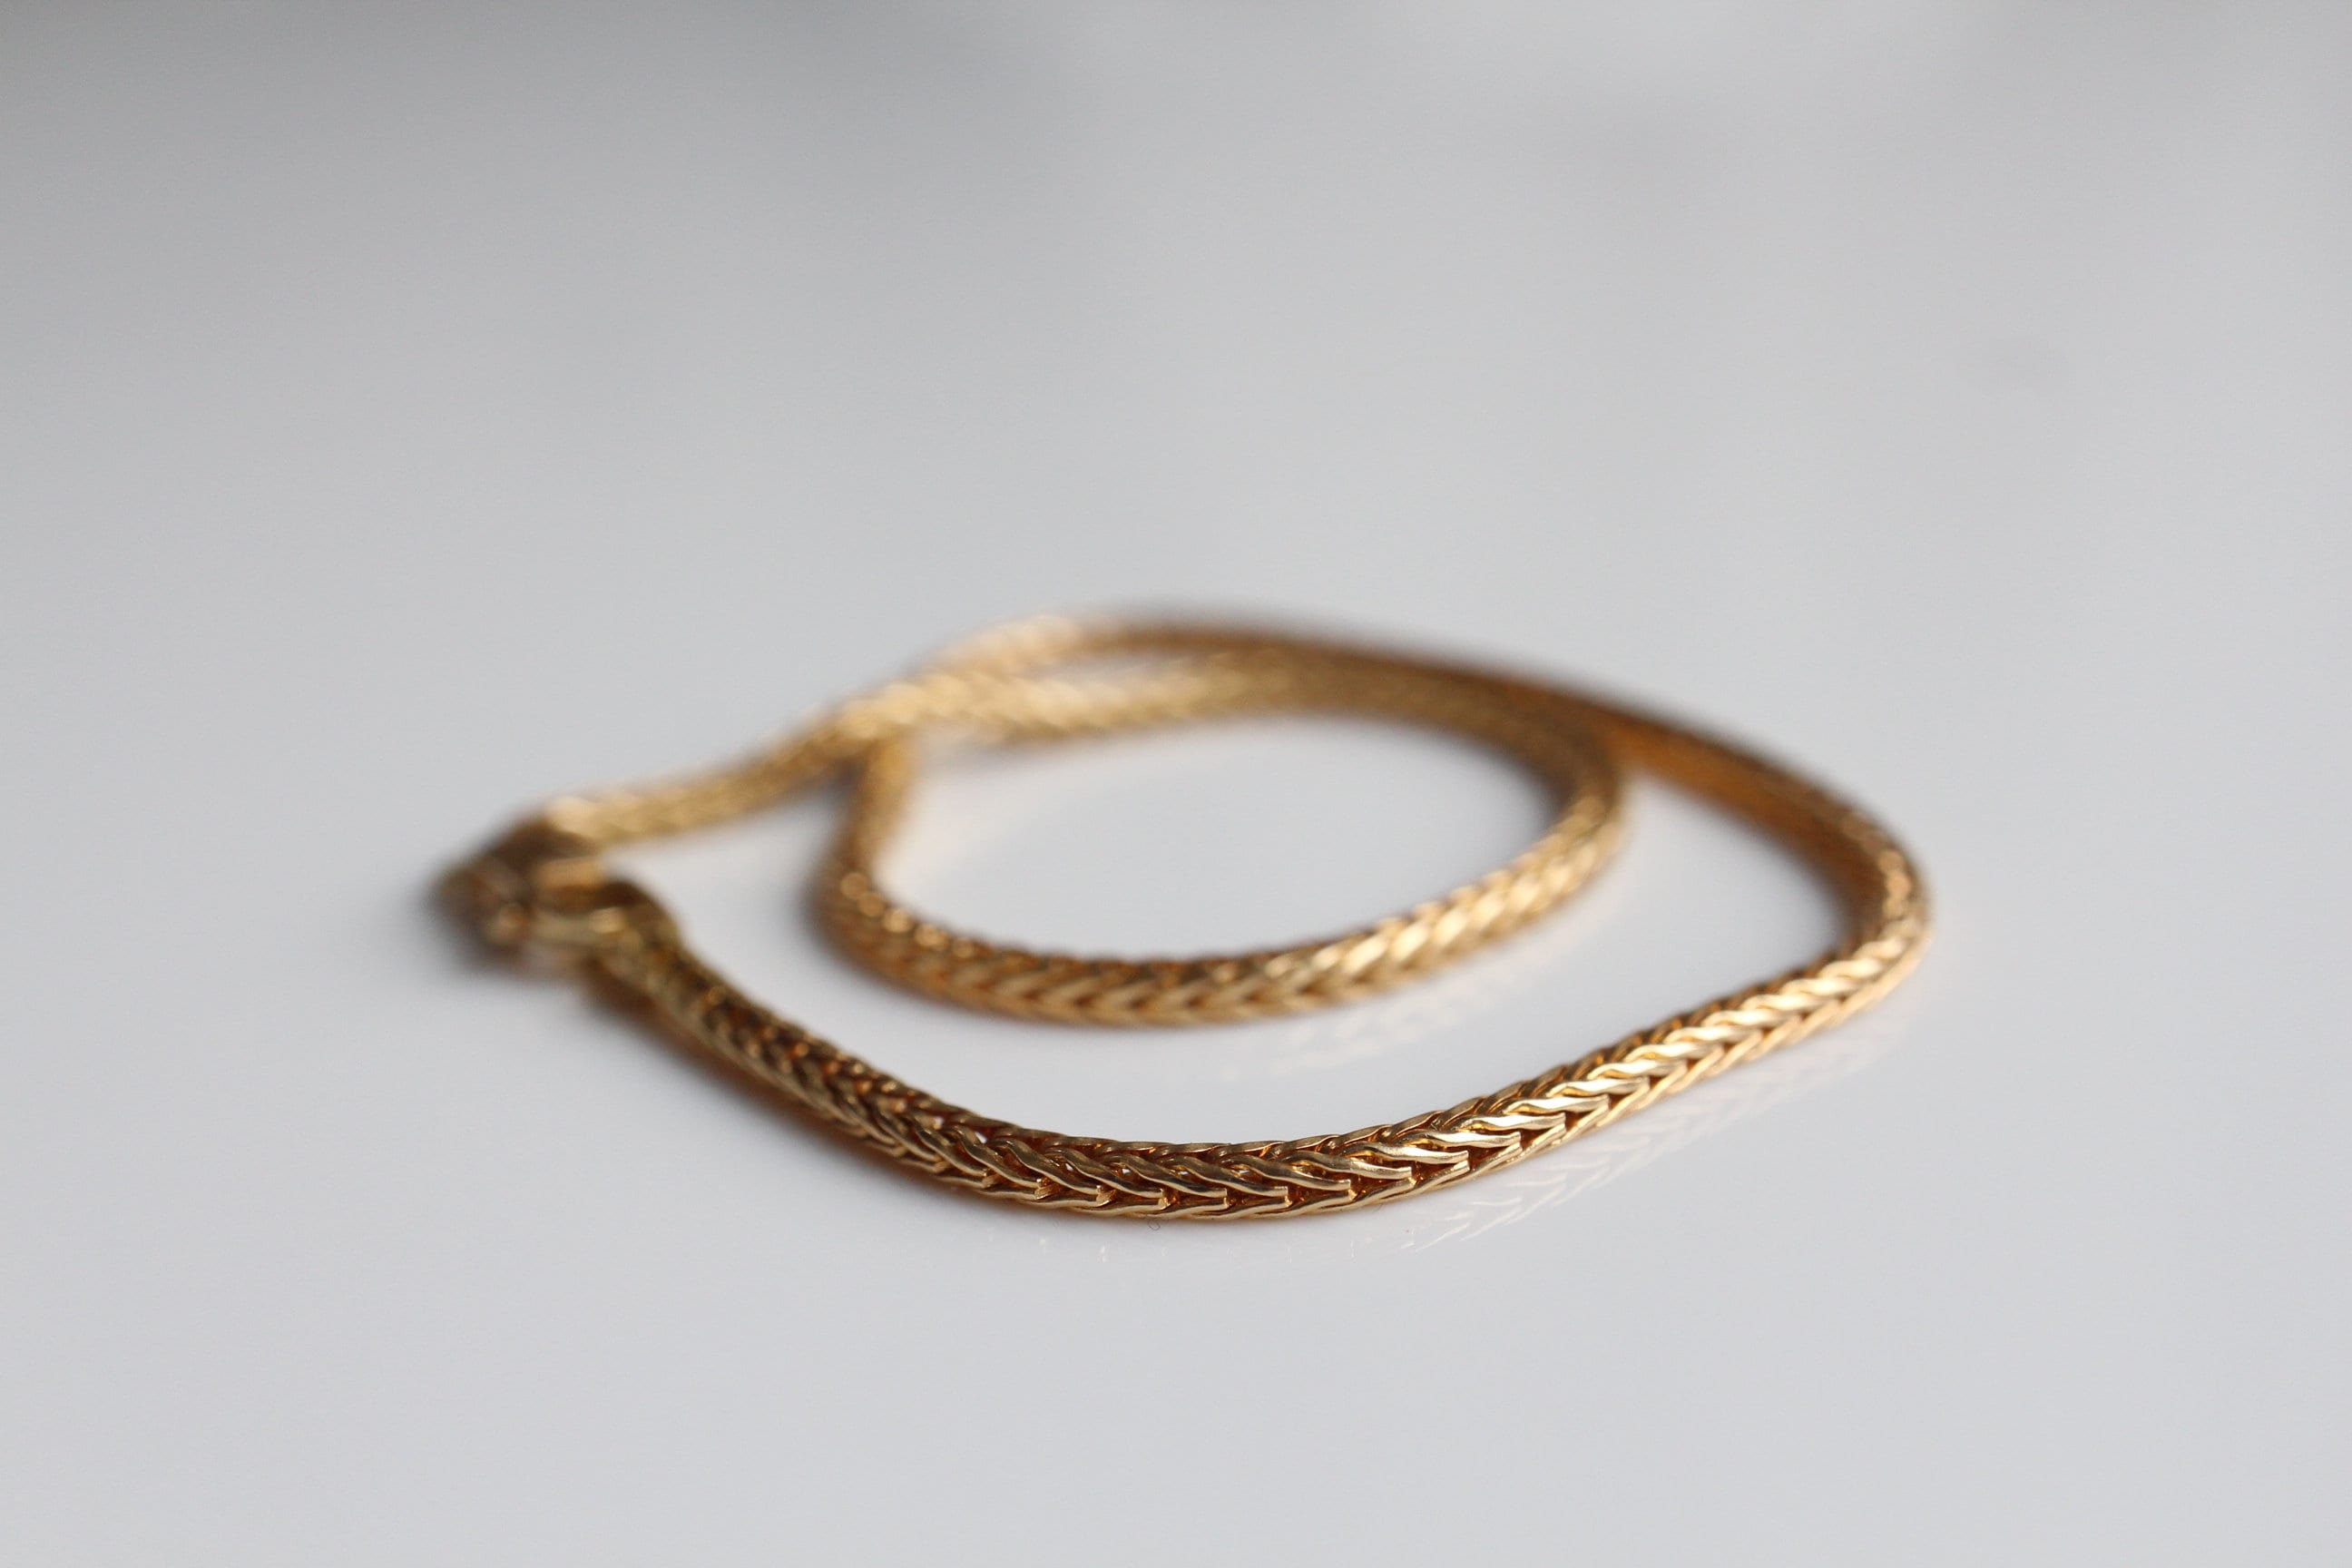 Buy 18k Yellow Gold Bangle Bracelet 18cm Online at SO ICY JEWELRY